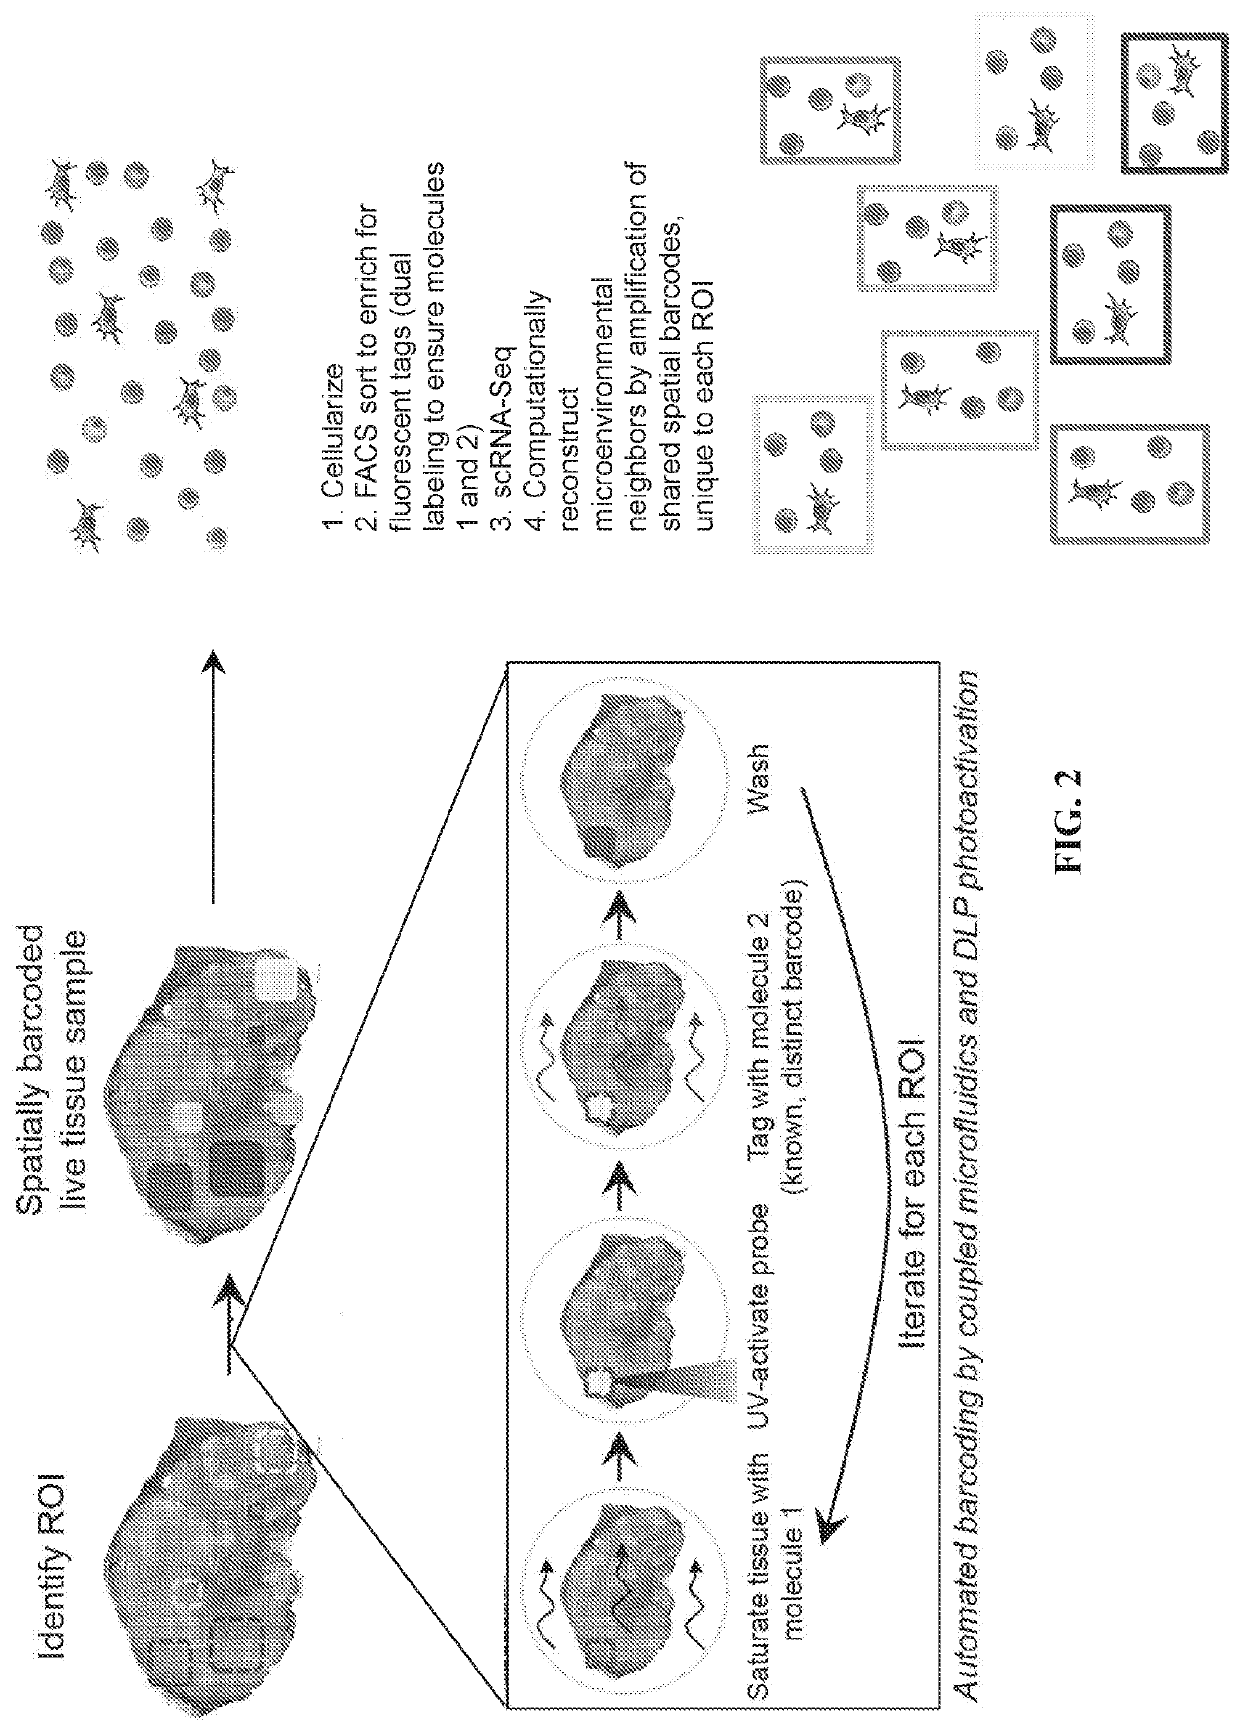 Methods for identifying and modulating co-occurant cellular phenotypes